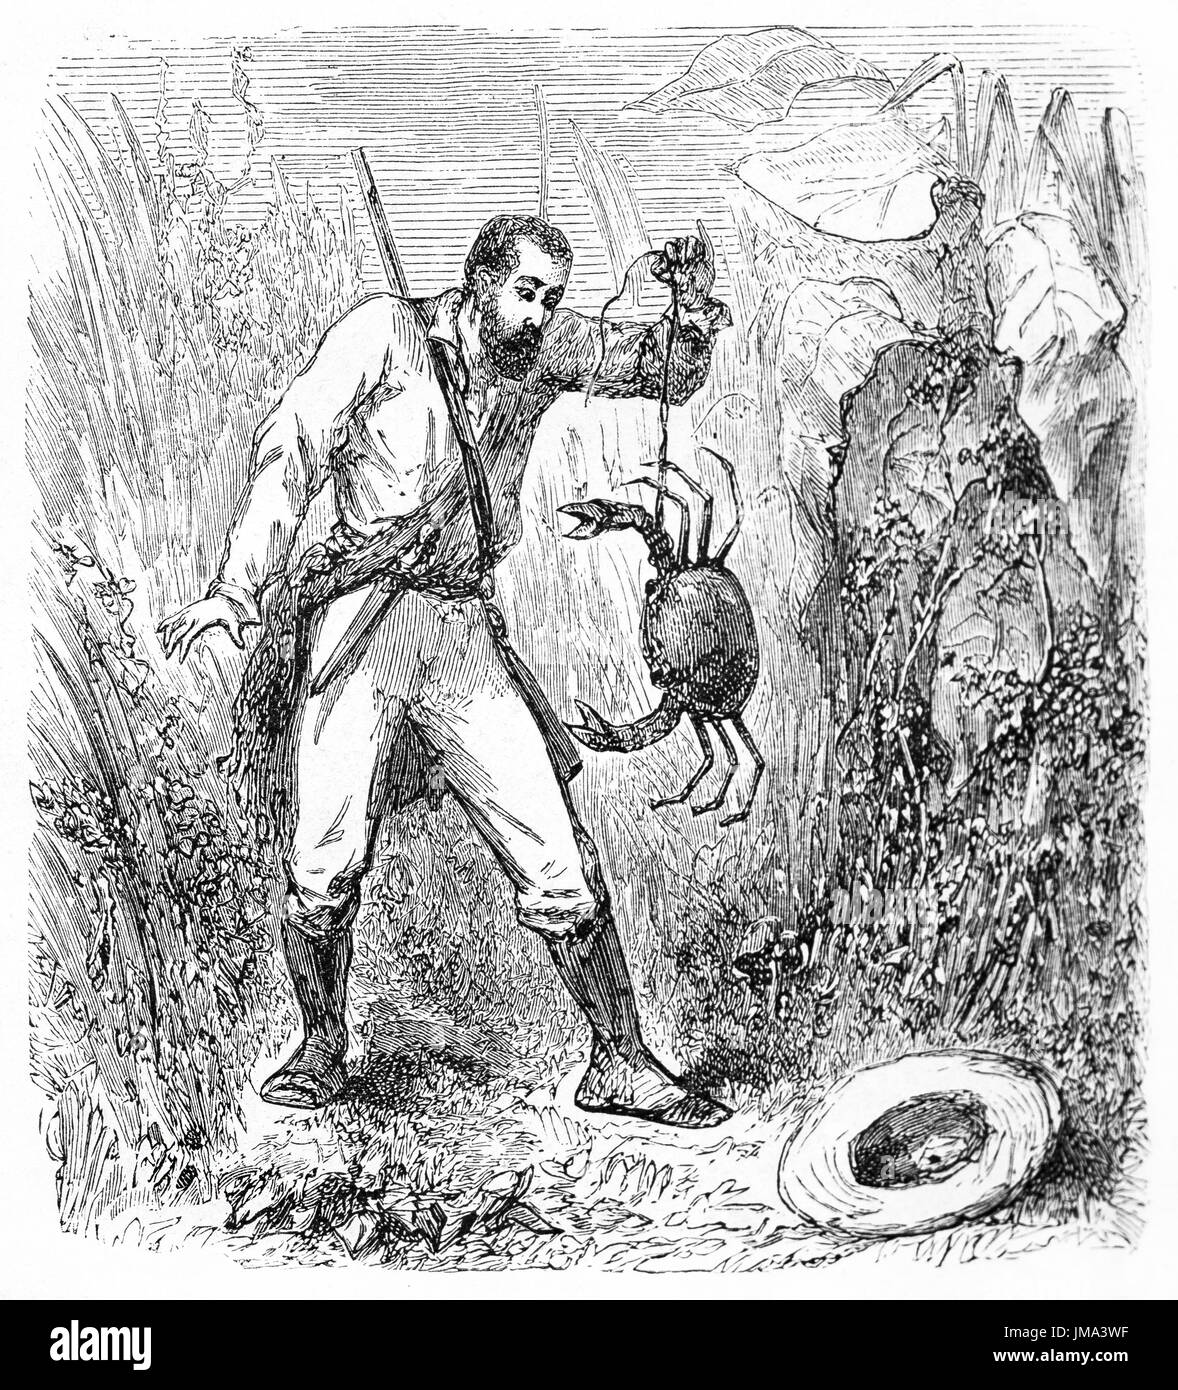 Amazed explorer in Brazilian rainforest holding a big crab using a string. Ancient grey tone etching style art by Riou and laly, Le Tour du Monde,1861 Stock Photo